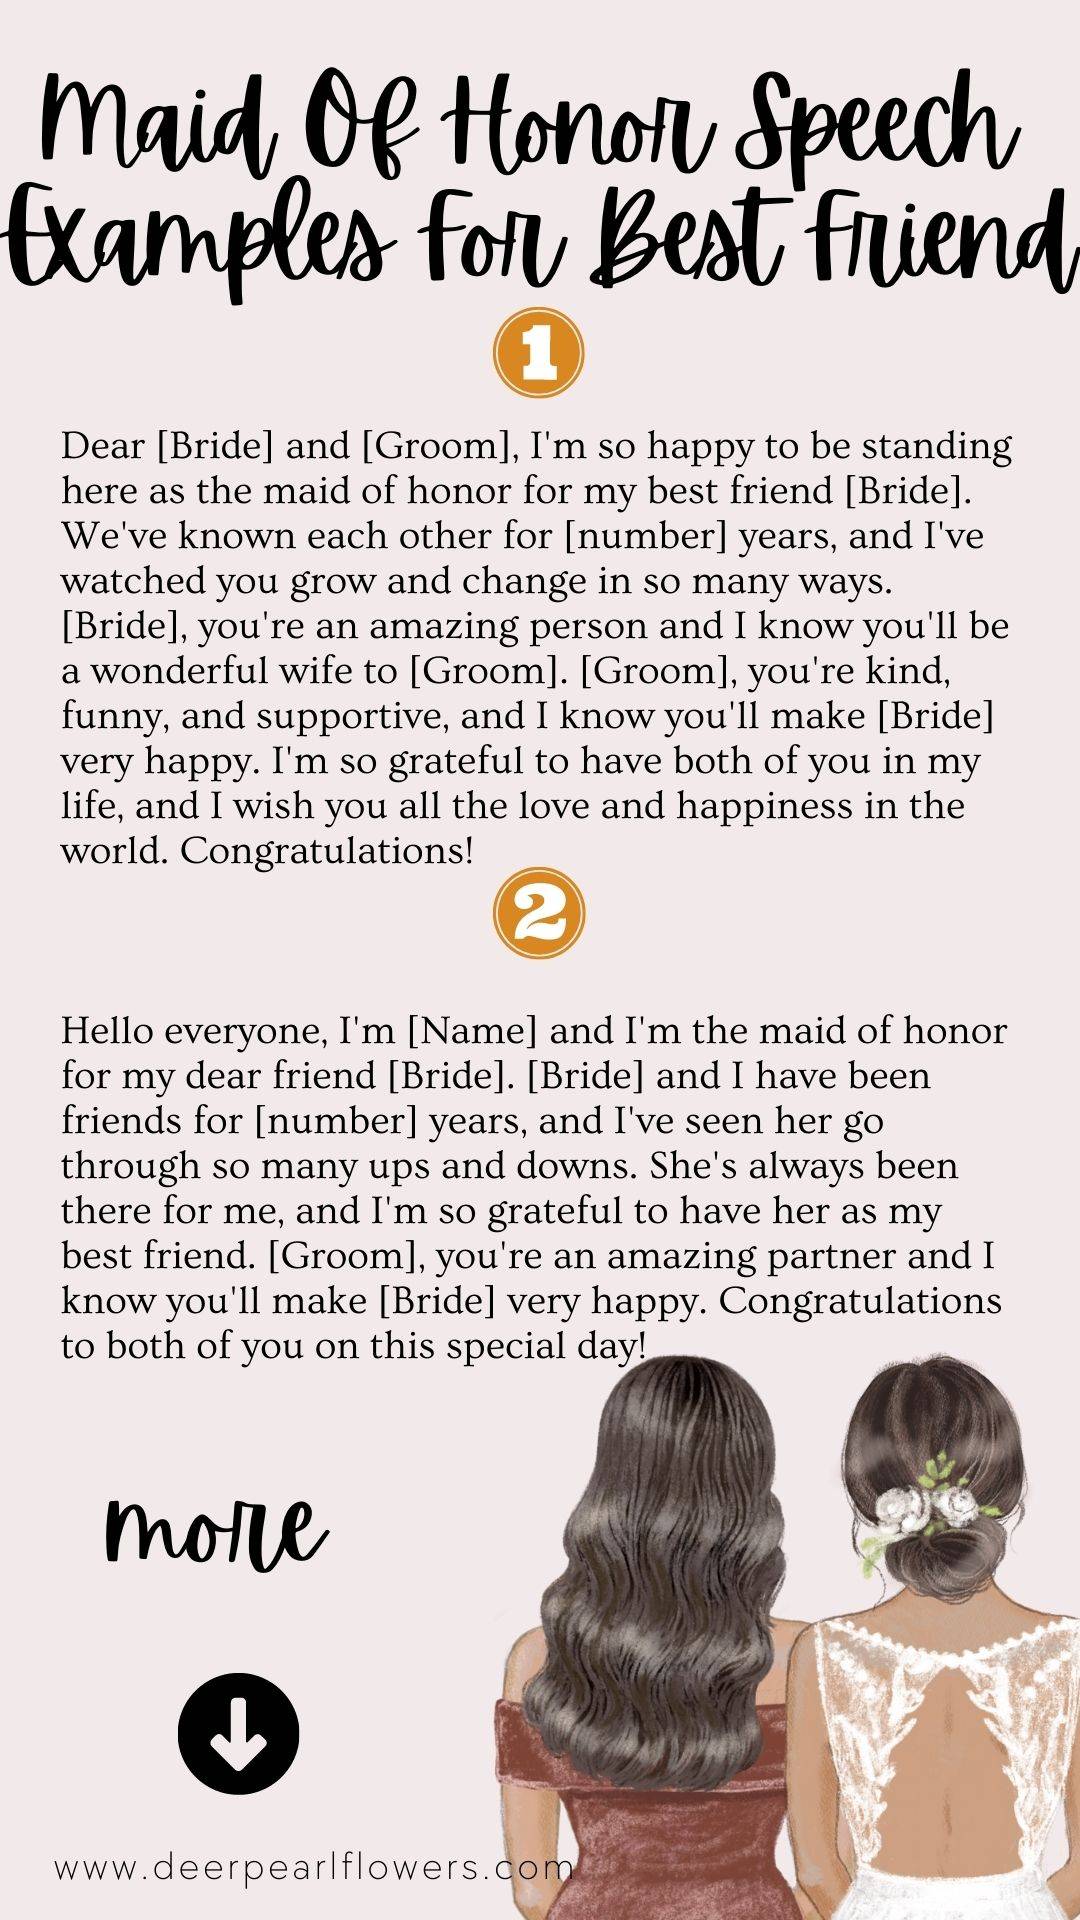 Maid Of Honor Speech Examples For Best Friend